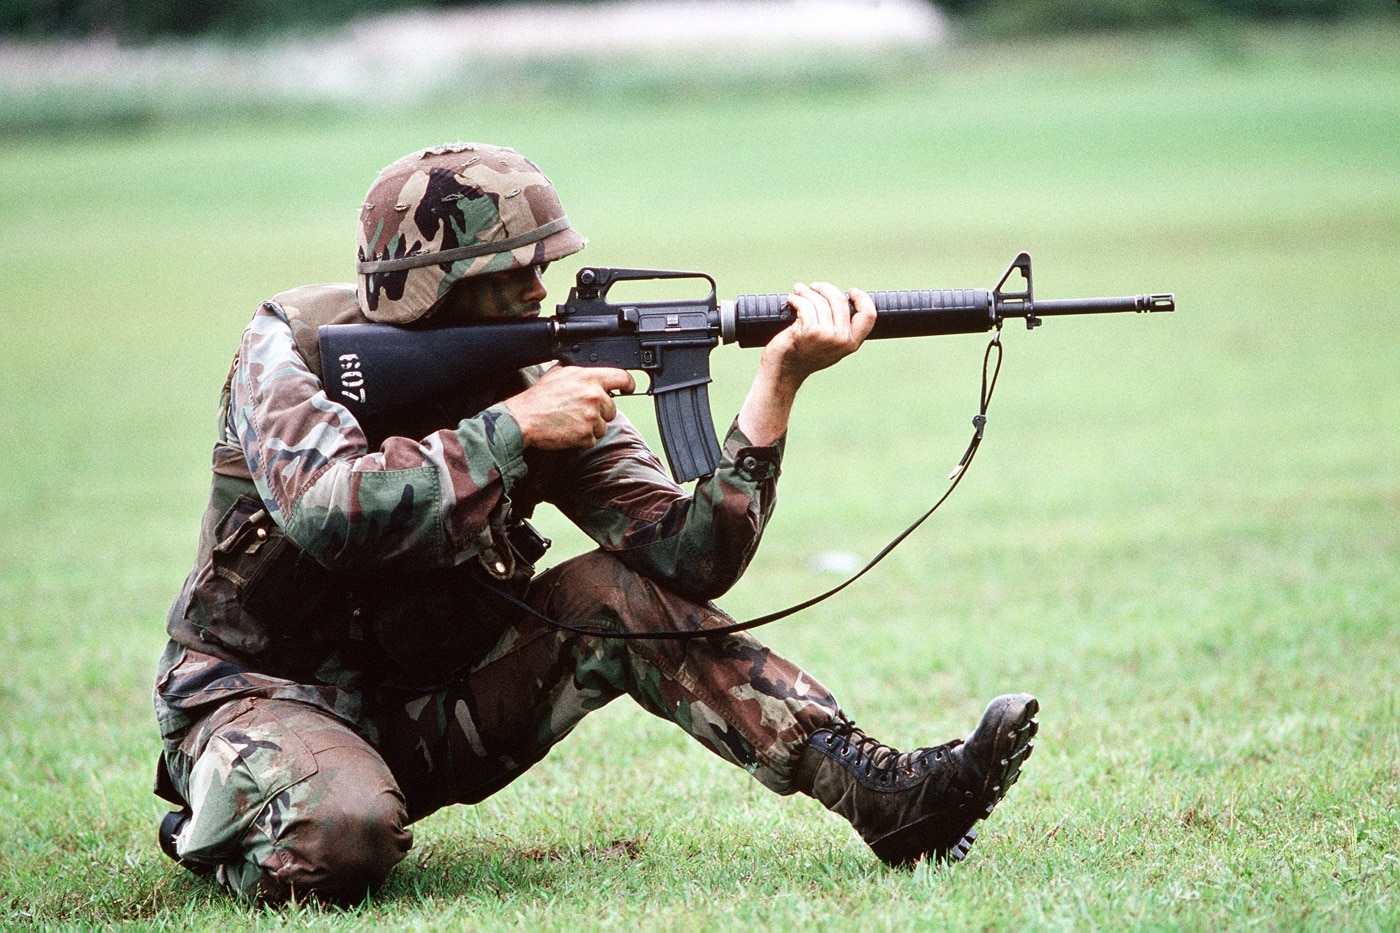 In this image, we see a U.S. Marine engaged in a rifle competition at Rodman Naval Station in 1989. Rodman was part of the Naval Base Panama Canal Zone military bases designed to protect the Panama Canal and shipping lanes around the Panama Canal Zone.